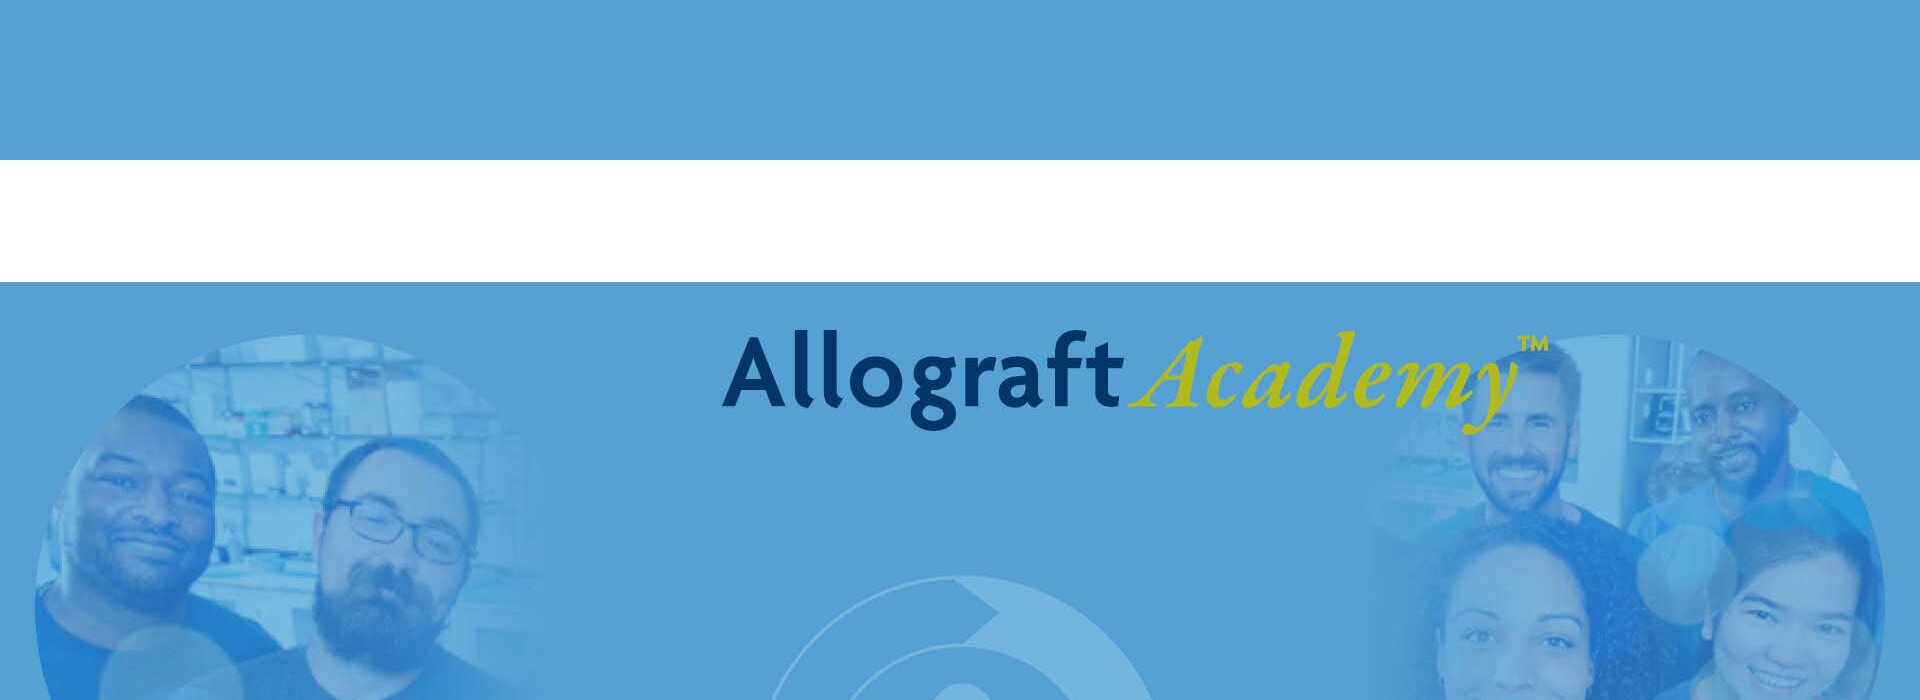 Click here for the Allograft Academy